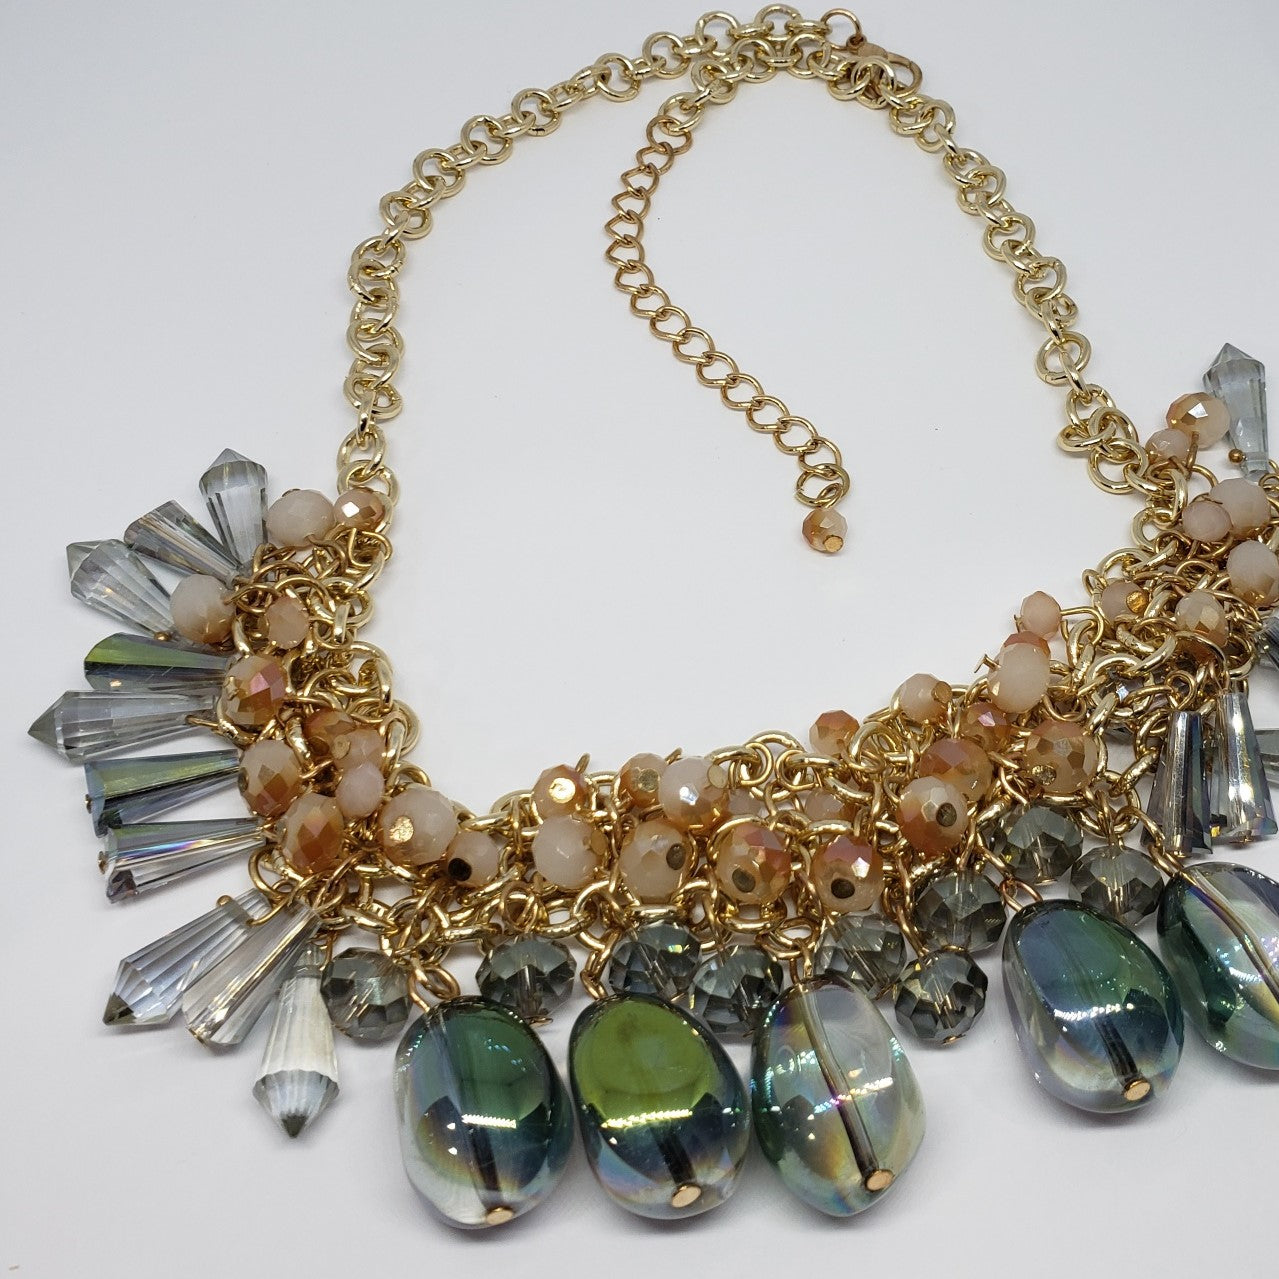 One to Own Multi Color Peach Magic Glass Bib Style Necklace - Houzz of DVA Boutique